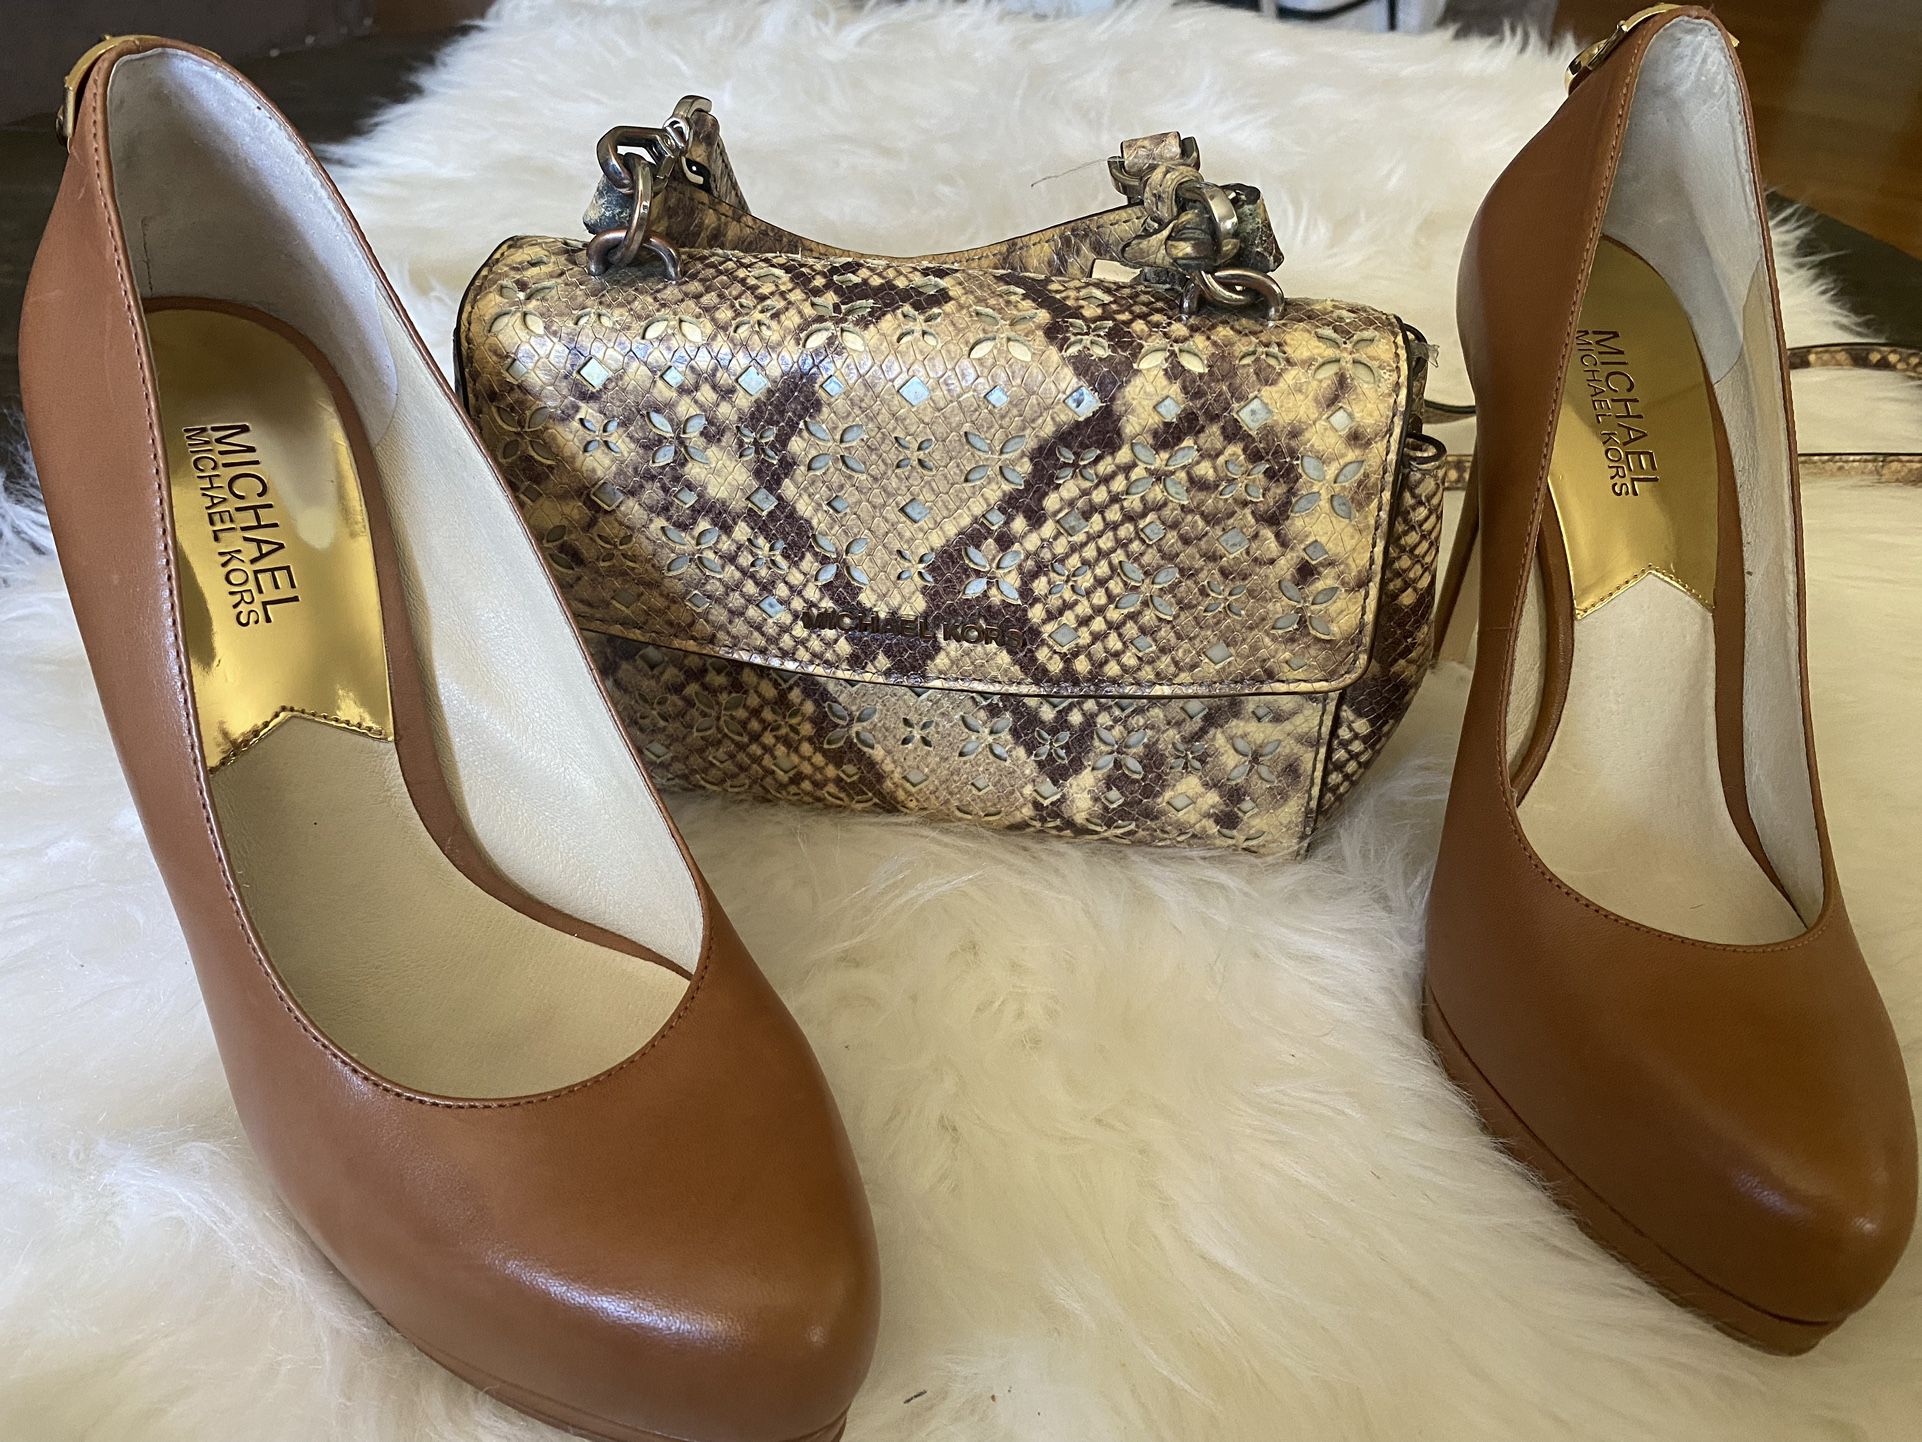 ichael Kors Women's Brown Leather Pumps with small bag